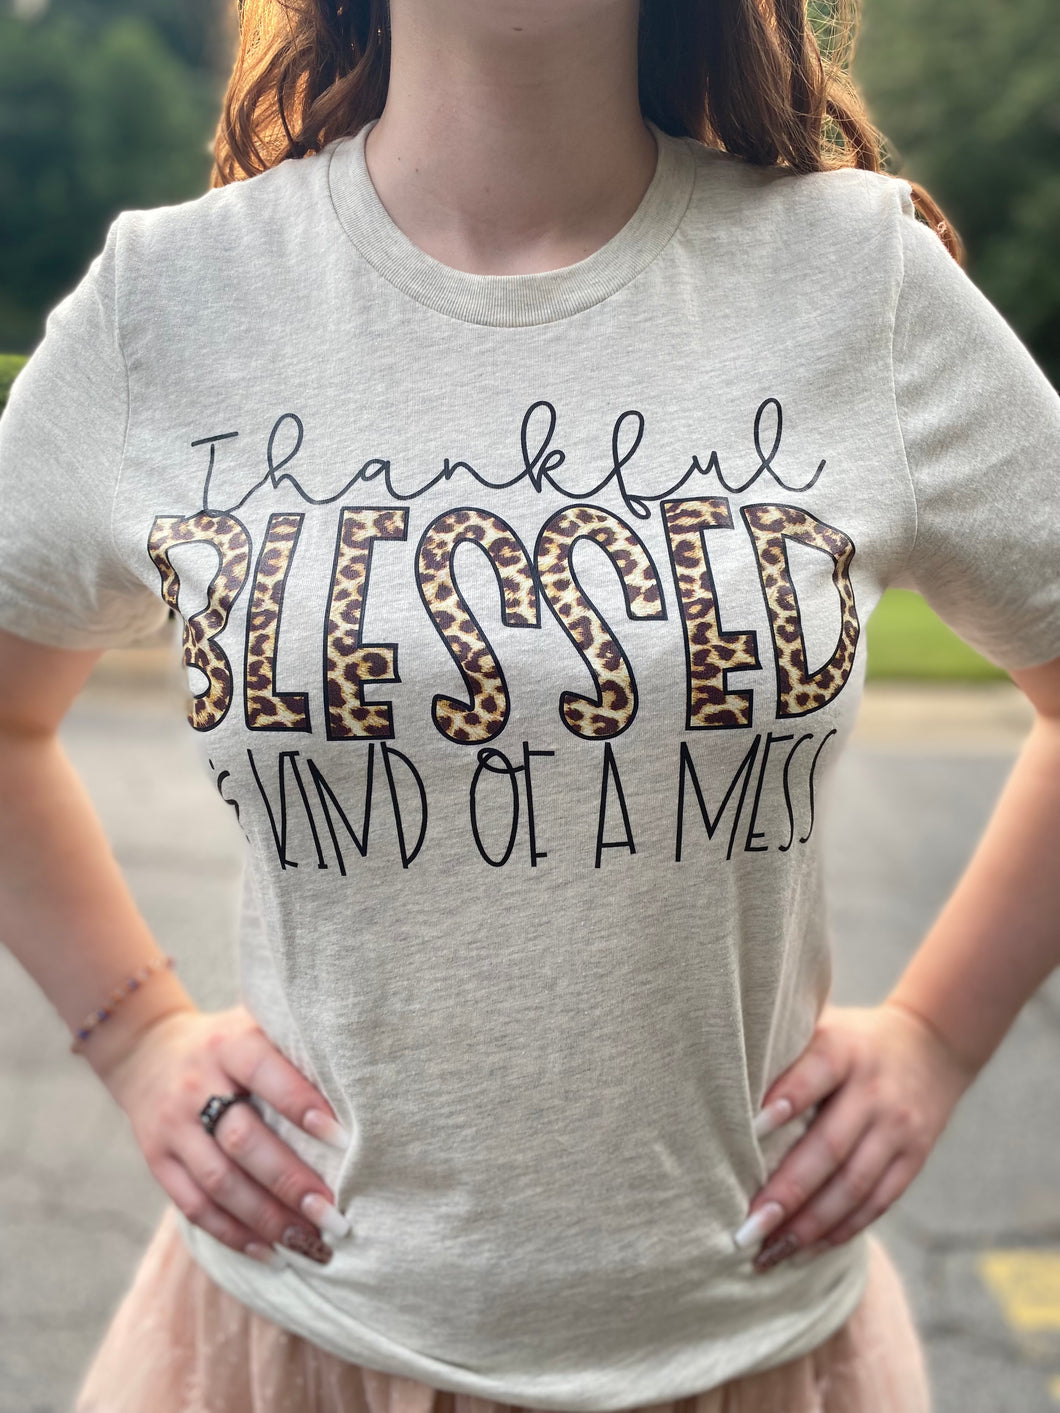 Thankful Blessed & kind of a Mess Tshirt